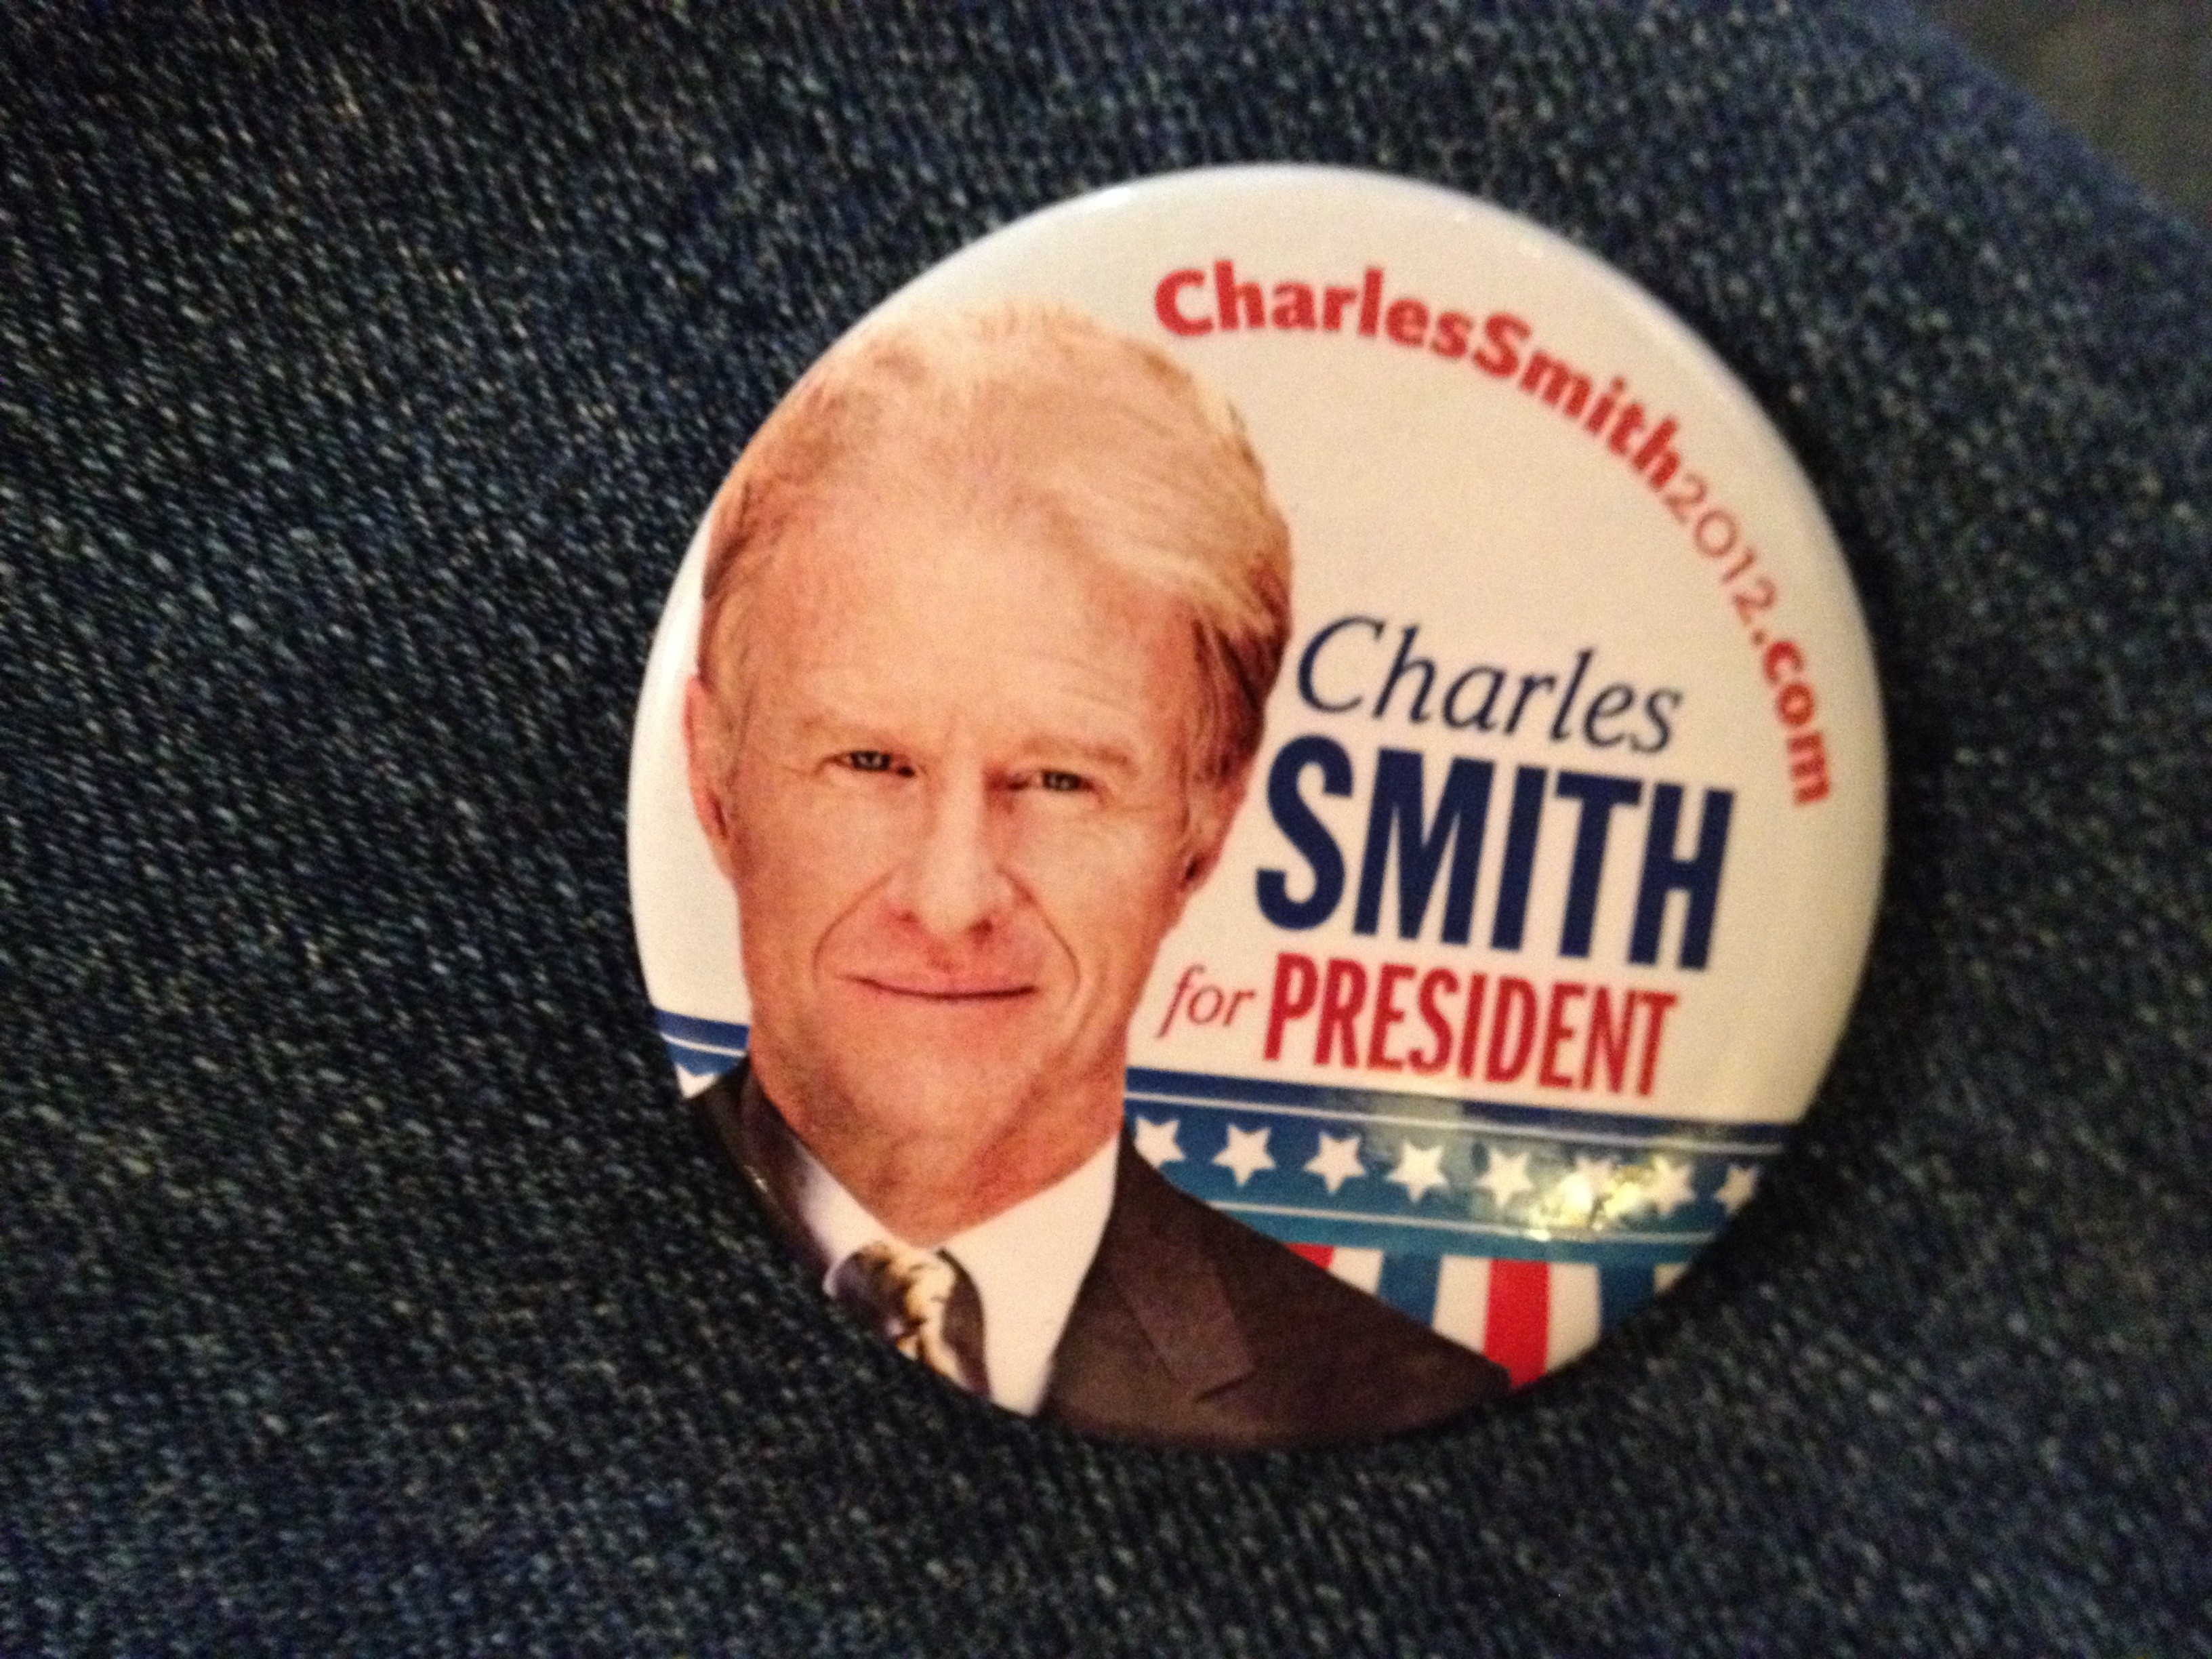 A pin given out at Opening Night.